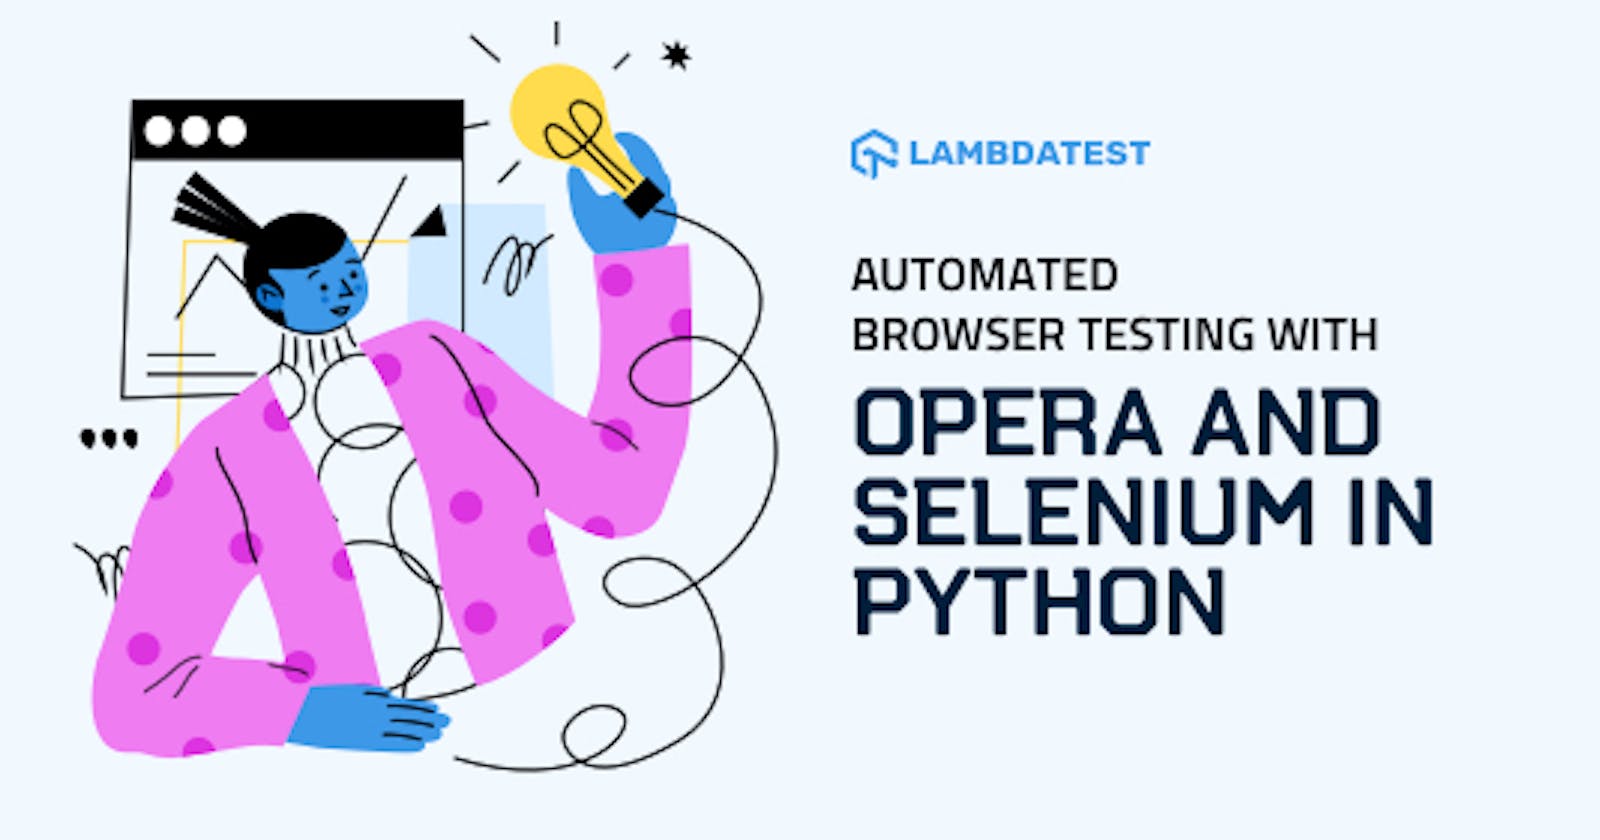 Automated Browser Testing with Opera and Selenium in Python